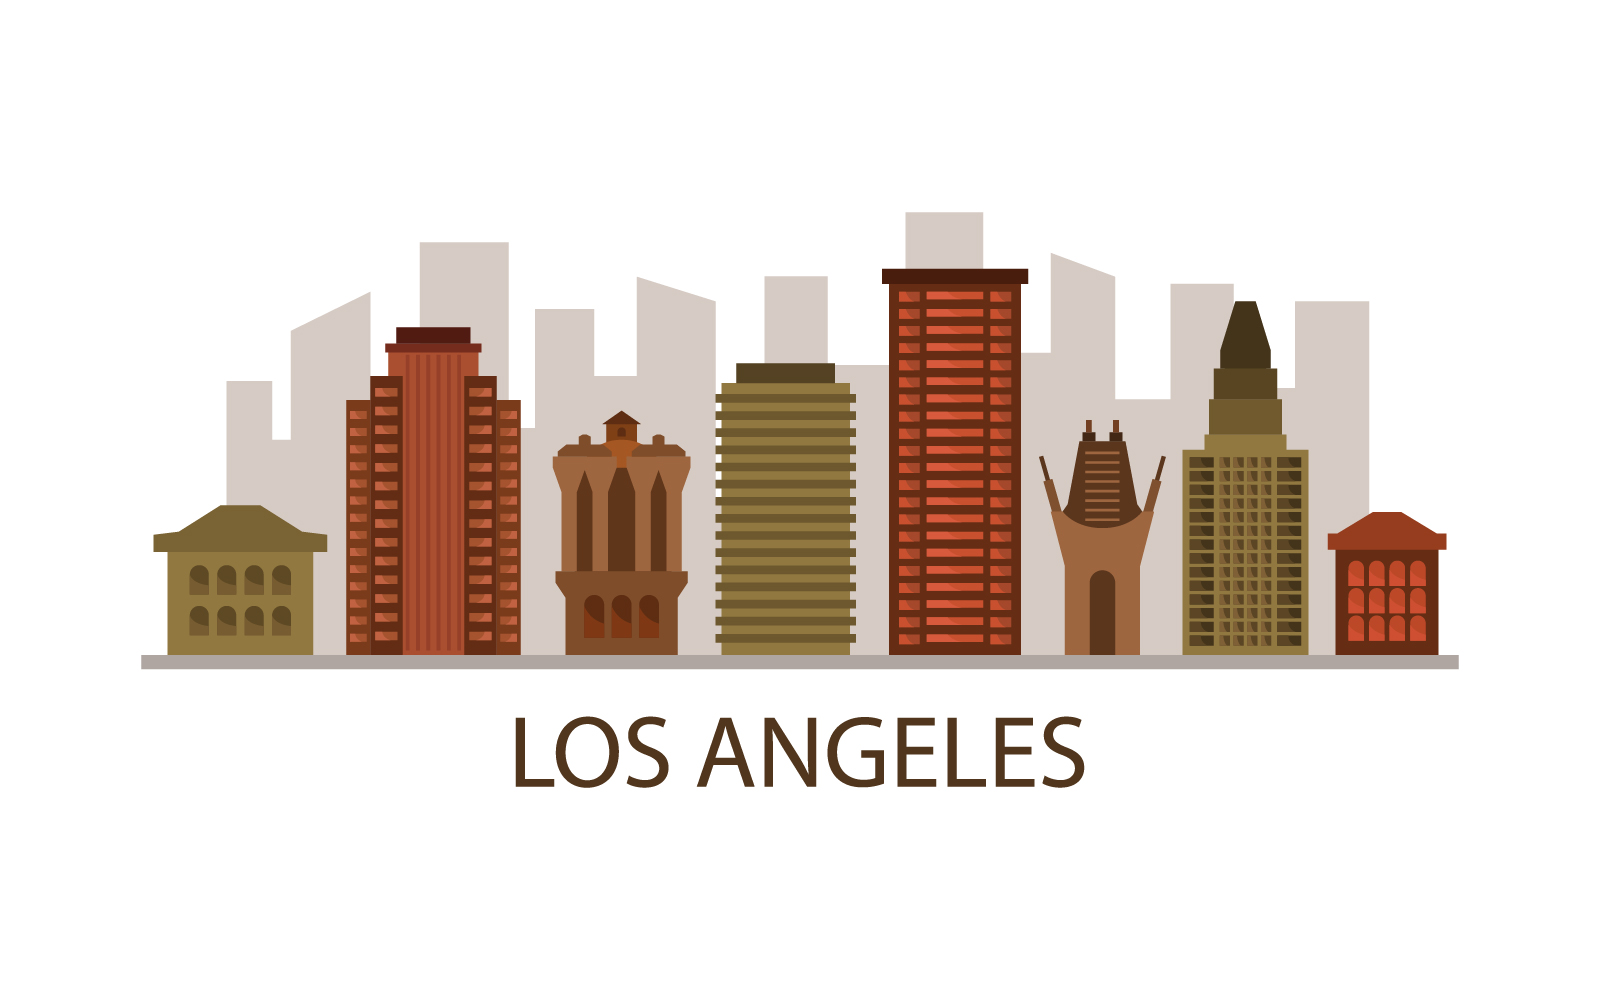 Los Angeles skyline illustrated in vector